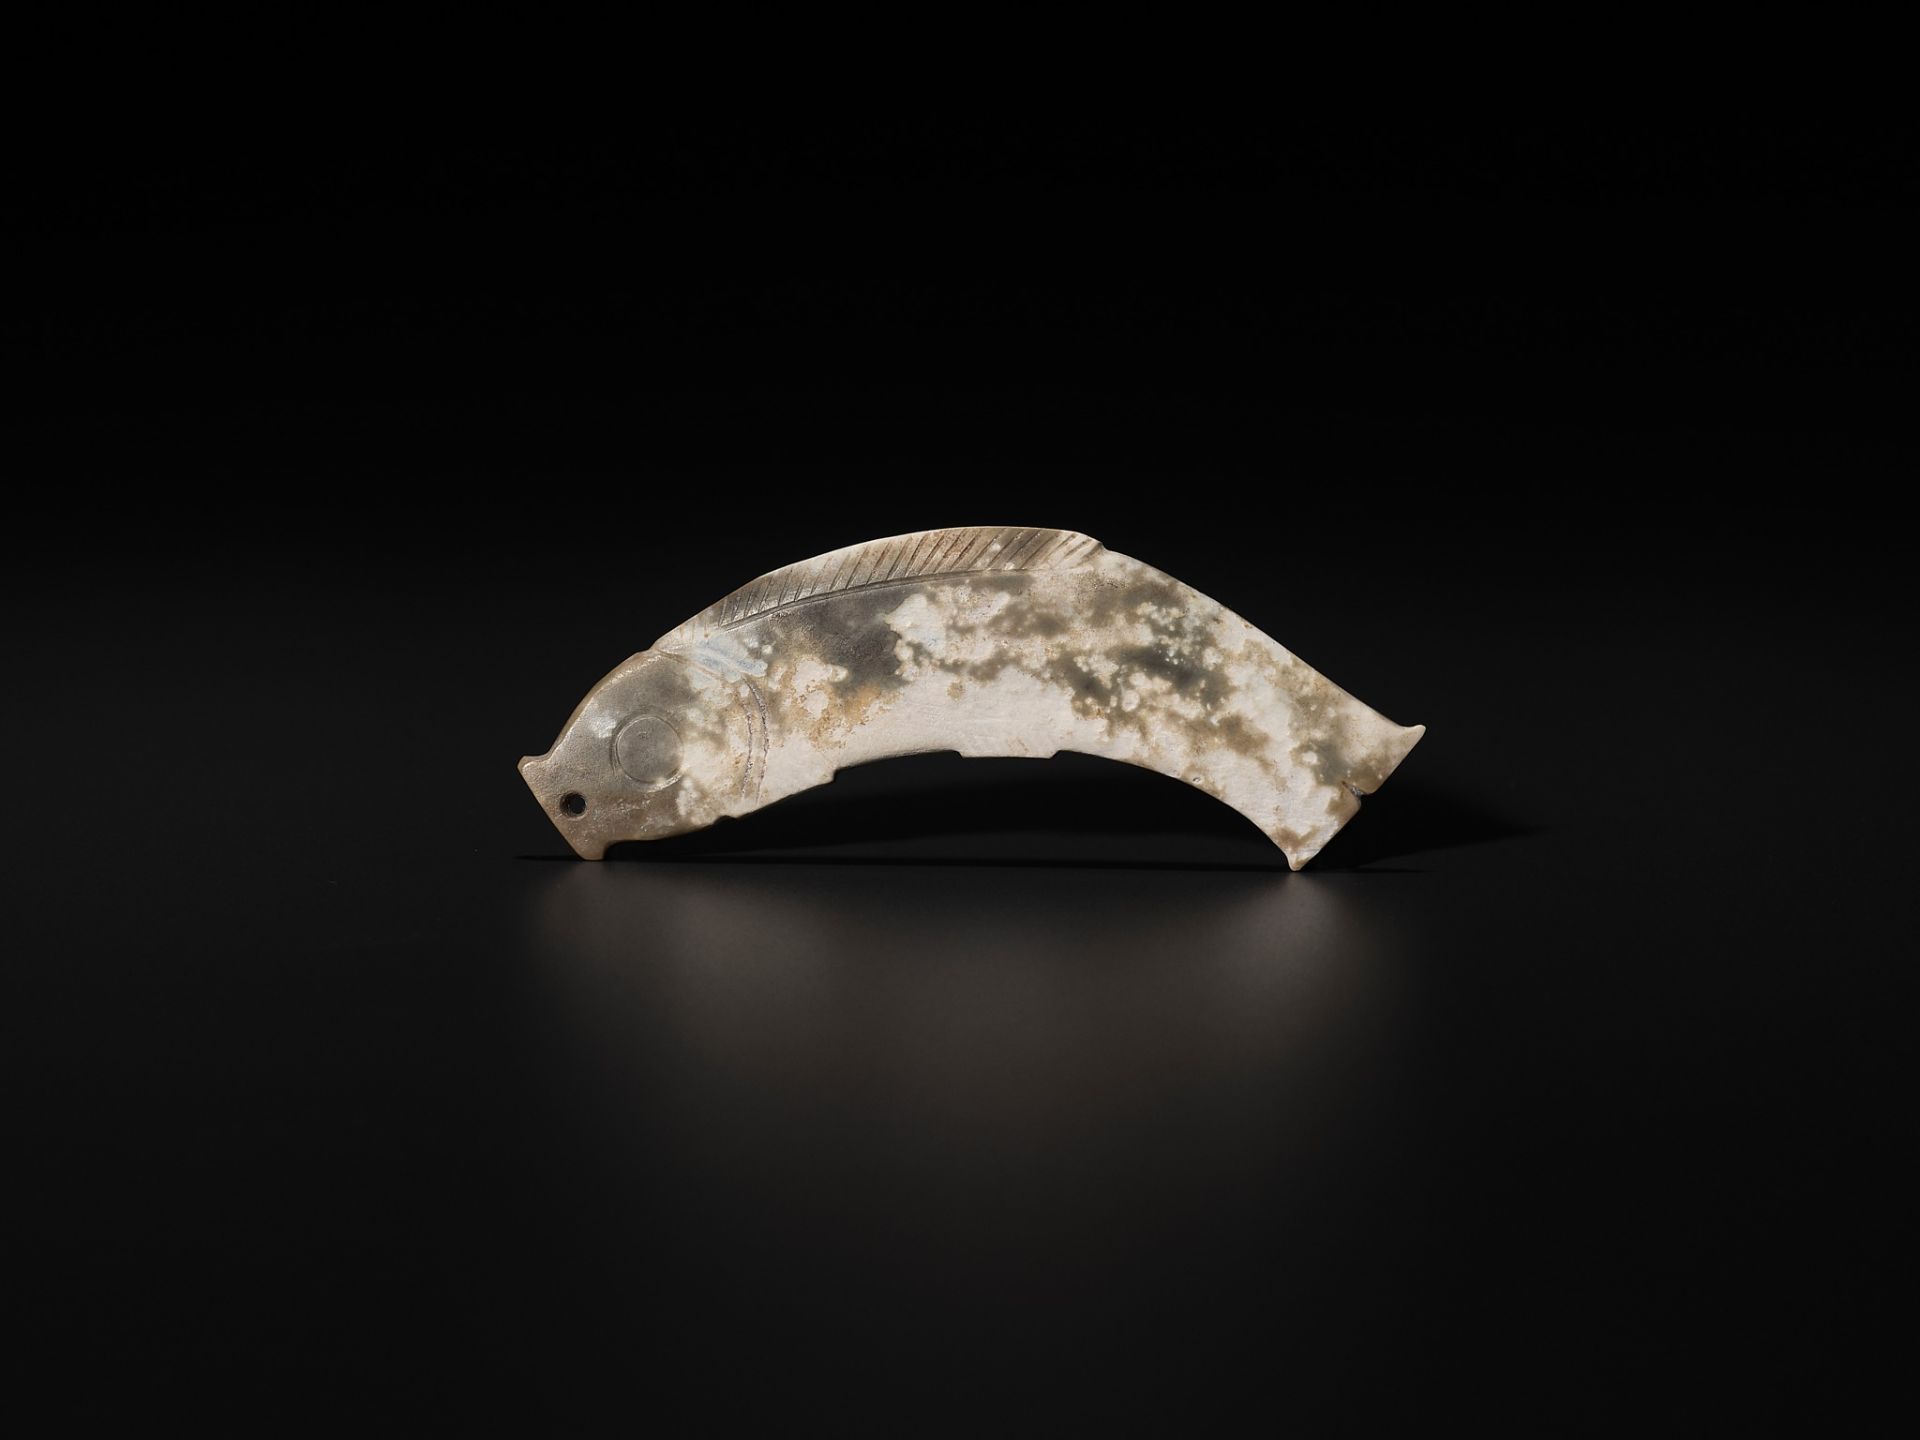 A DEEP CELADON JADE 'FISH' PENDANT, LATE SHANG TO WESTERN ZHOU DYNASTY - Image 10 of 10